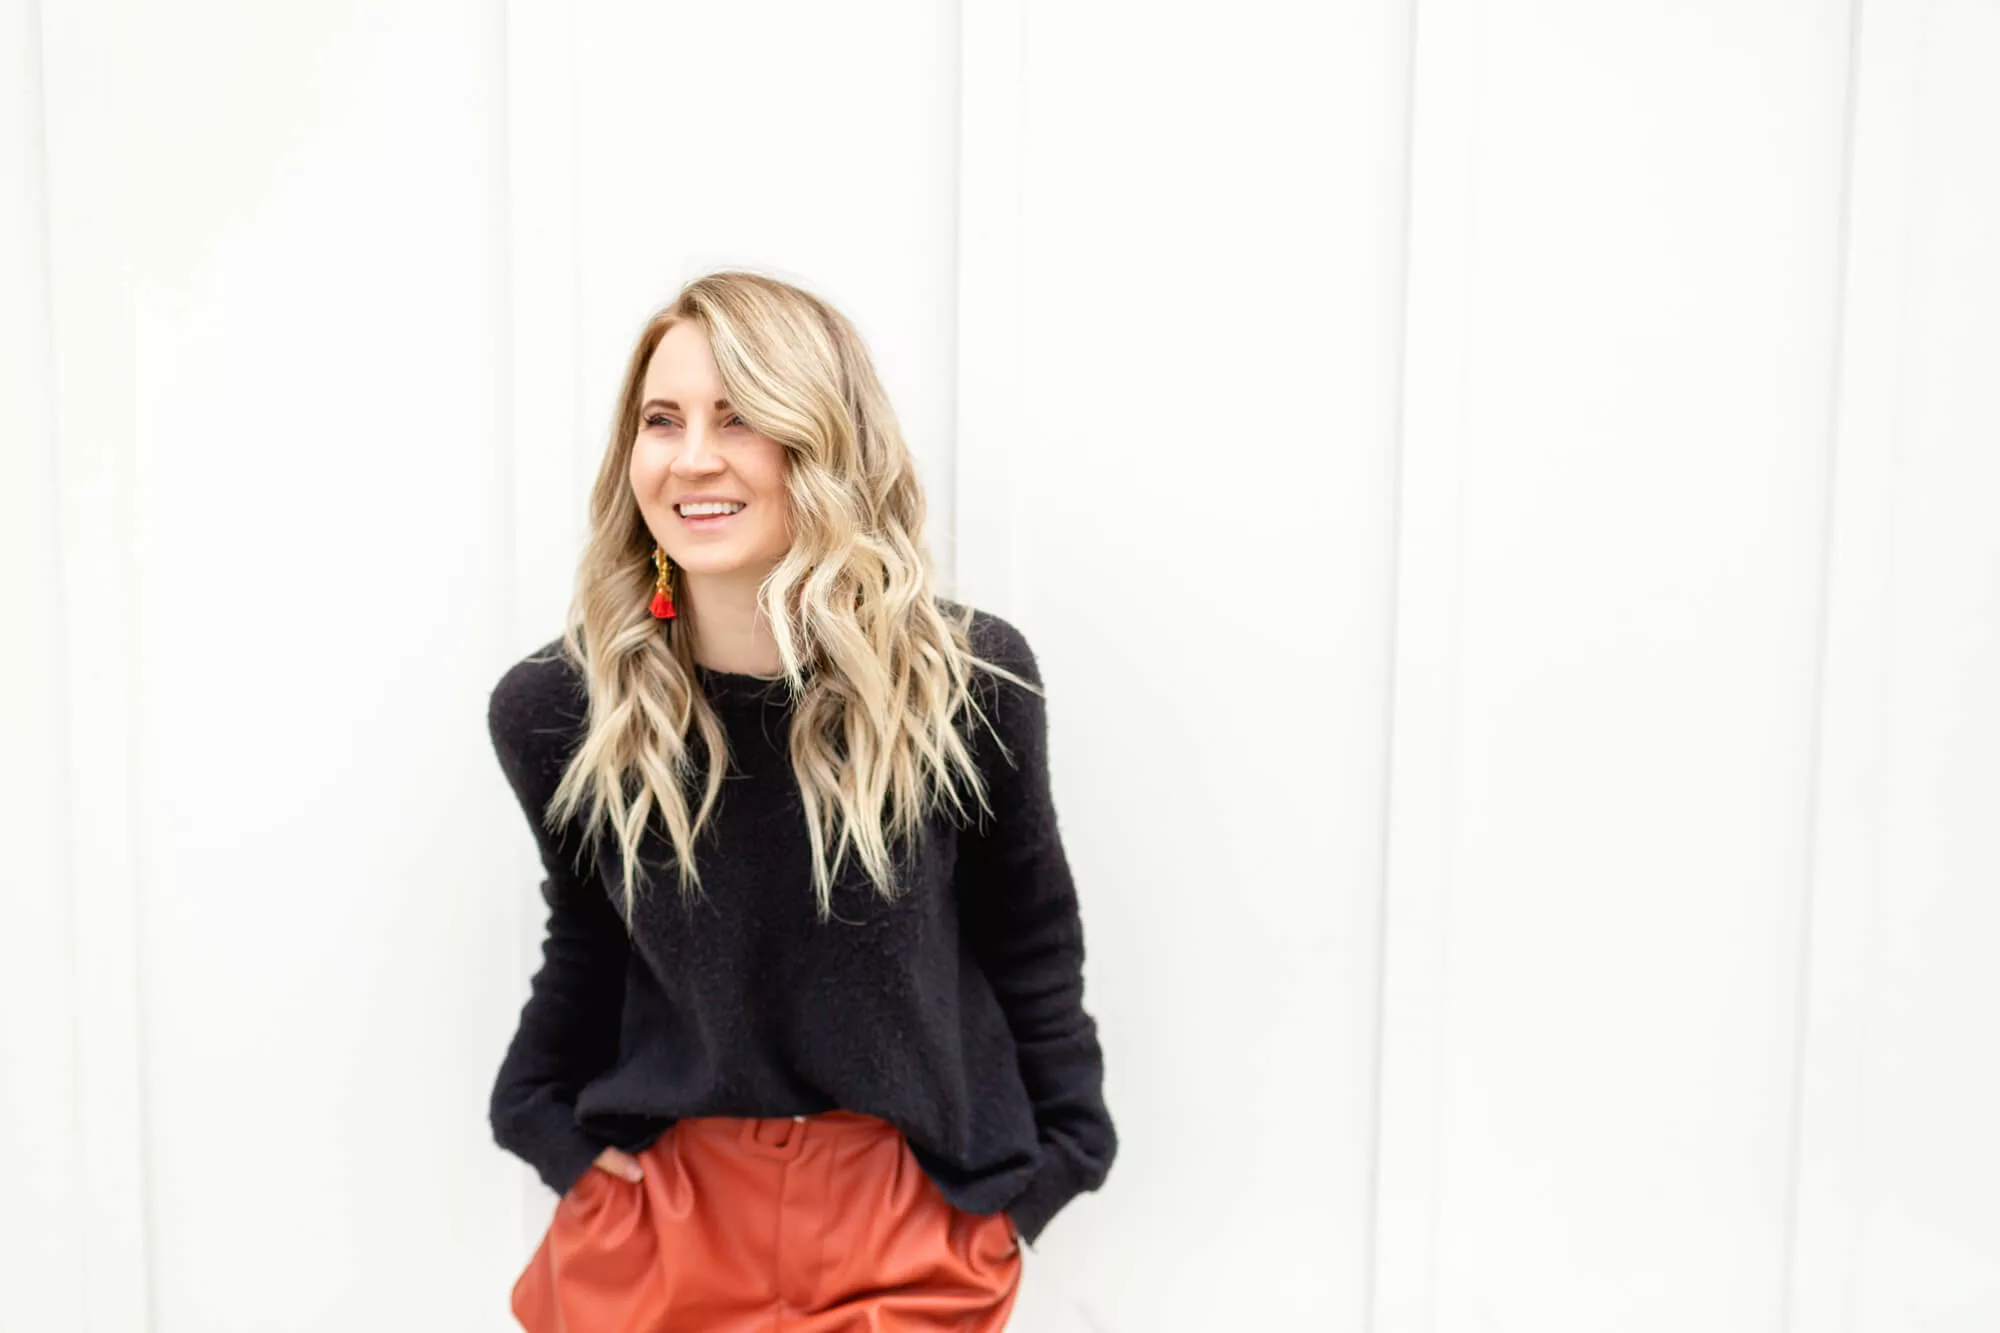 Elegant blonde woman in orange leather skirt and black sweater exudes sophistication and style during headshot session with San Diego Photographer. She's laughing while leaning up against a white wall.